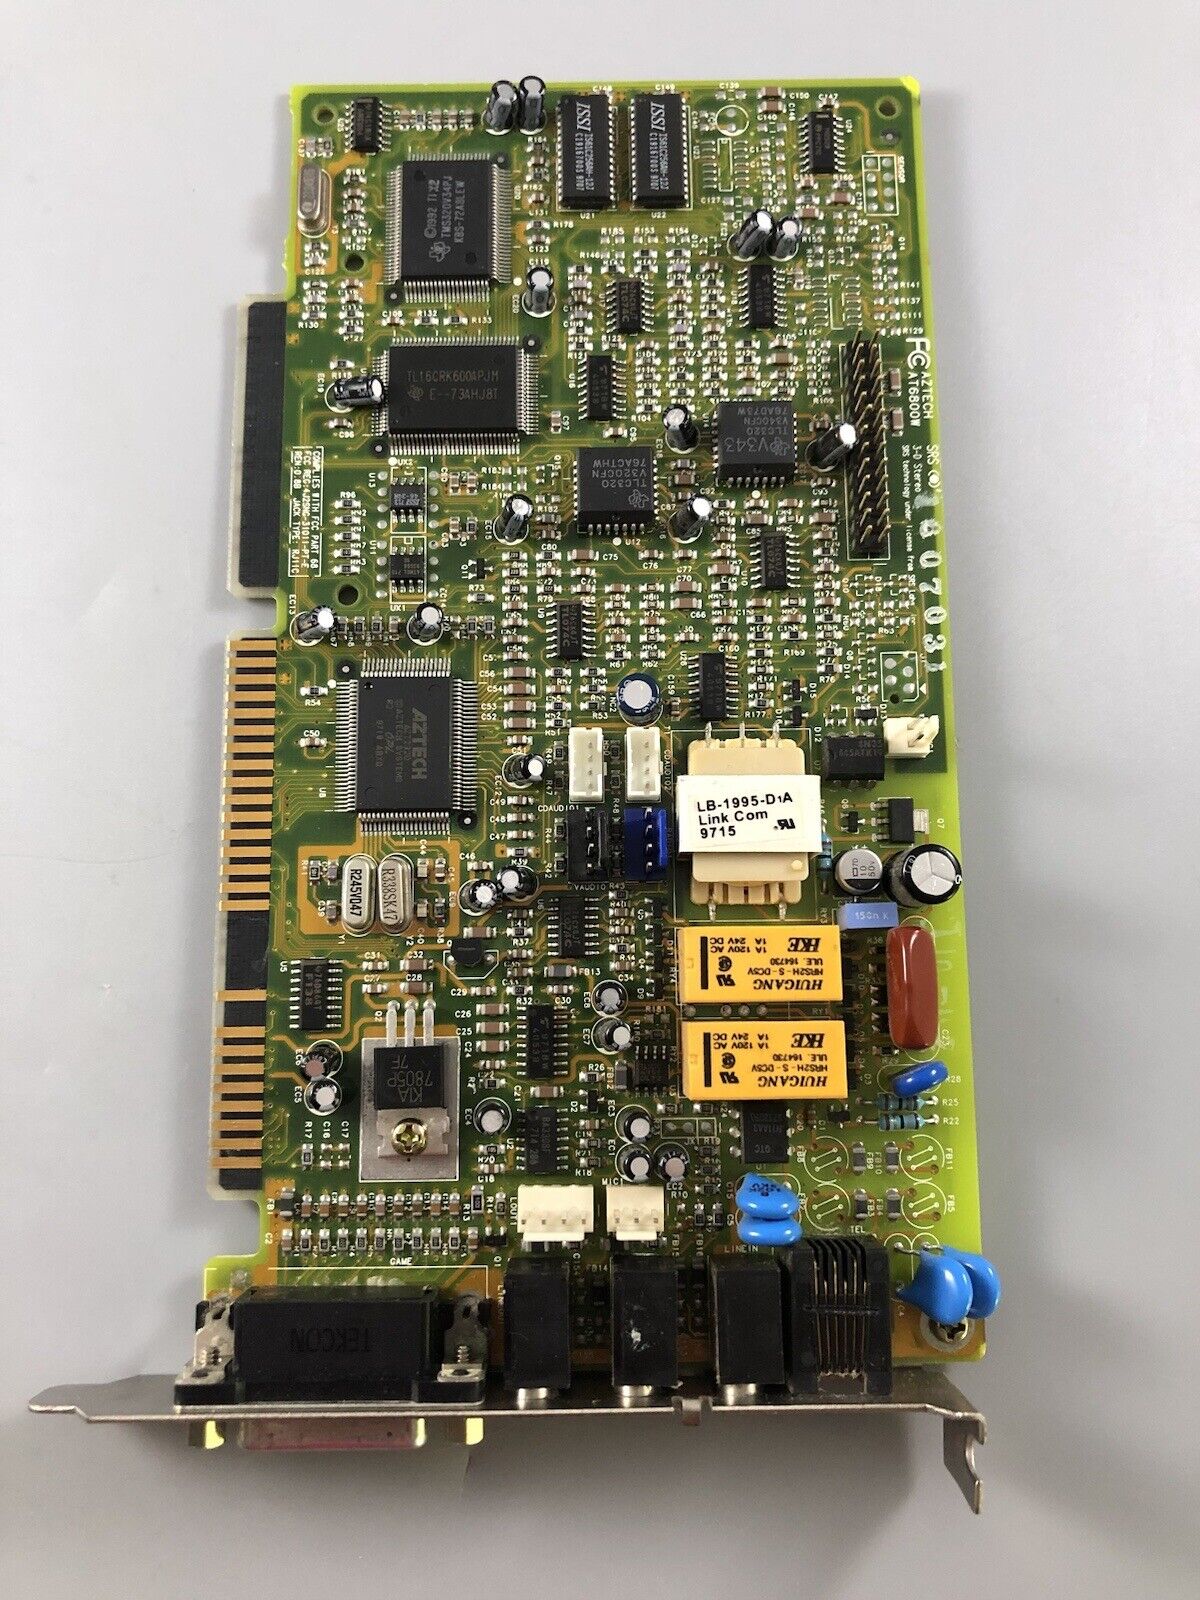 Aztech SRS3-D Stereo ISA Sound-Modem Card AT6800W 050-516925-405 - Untested Xy8